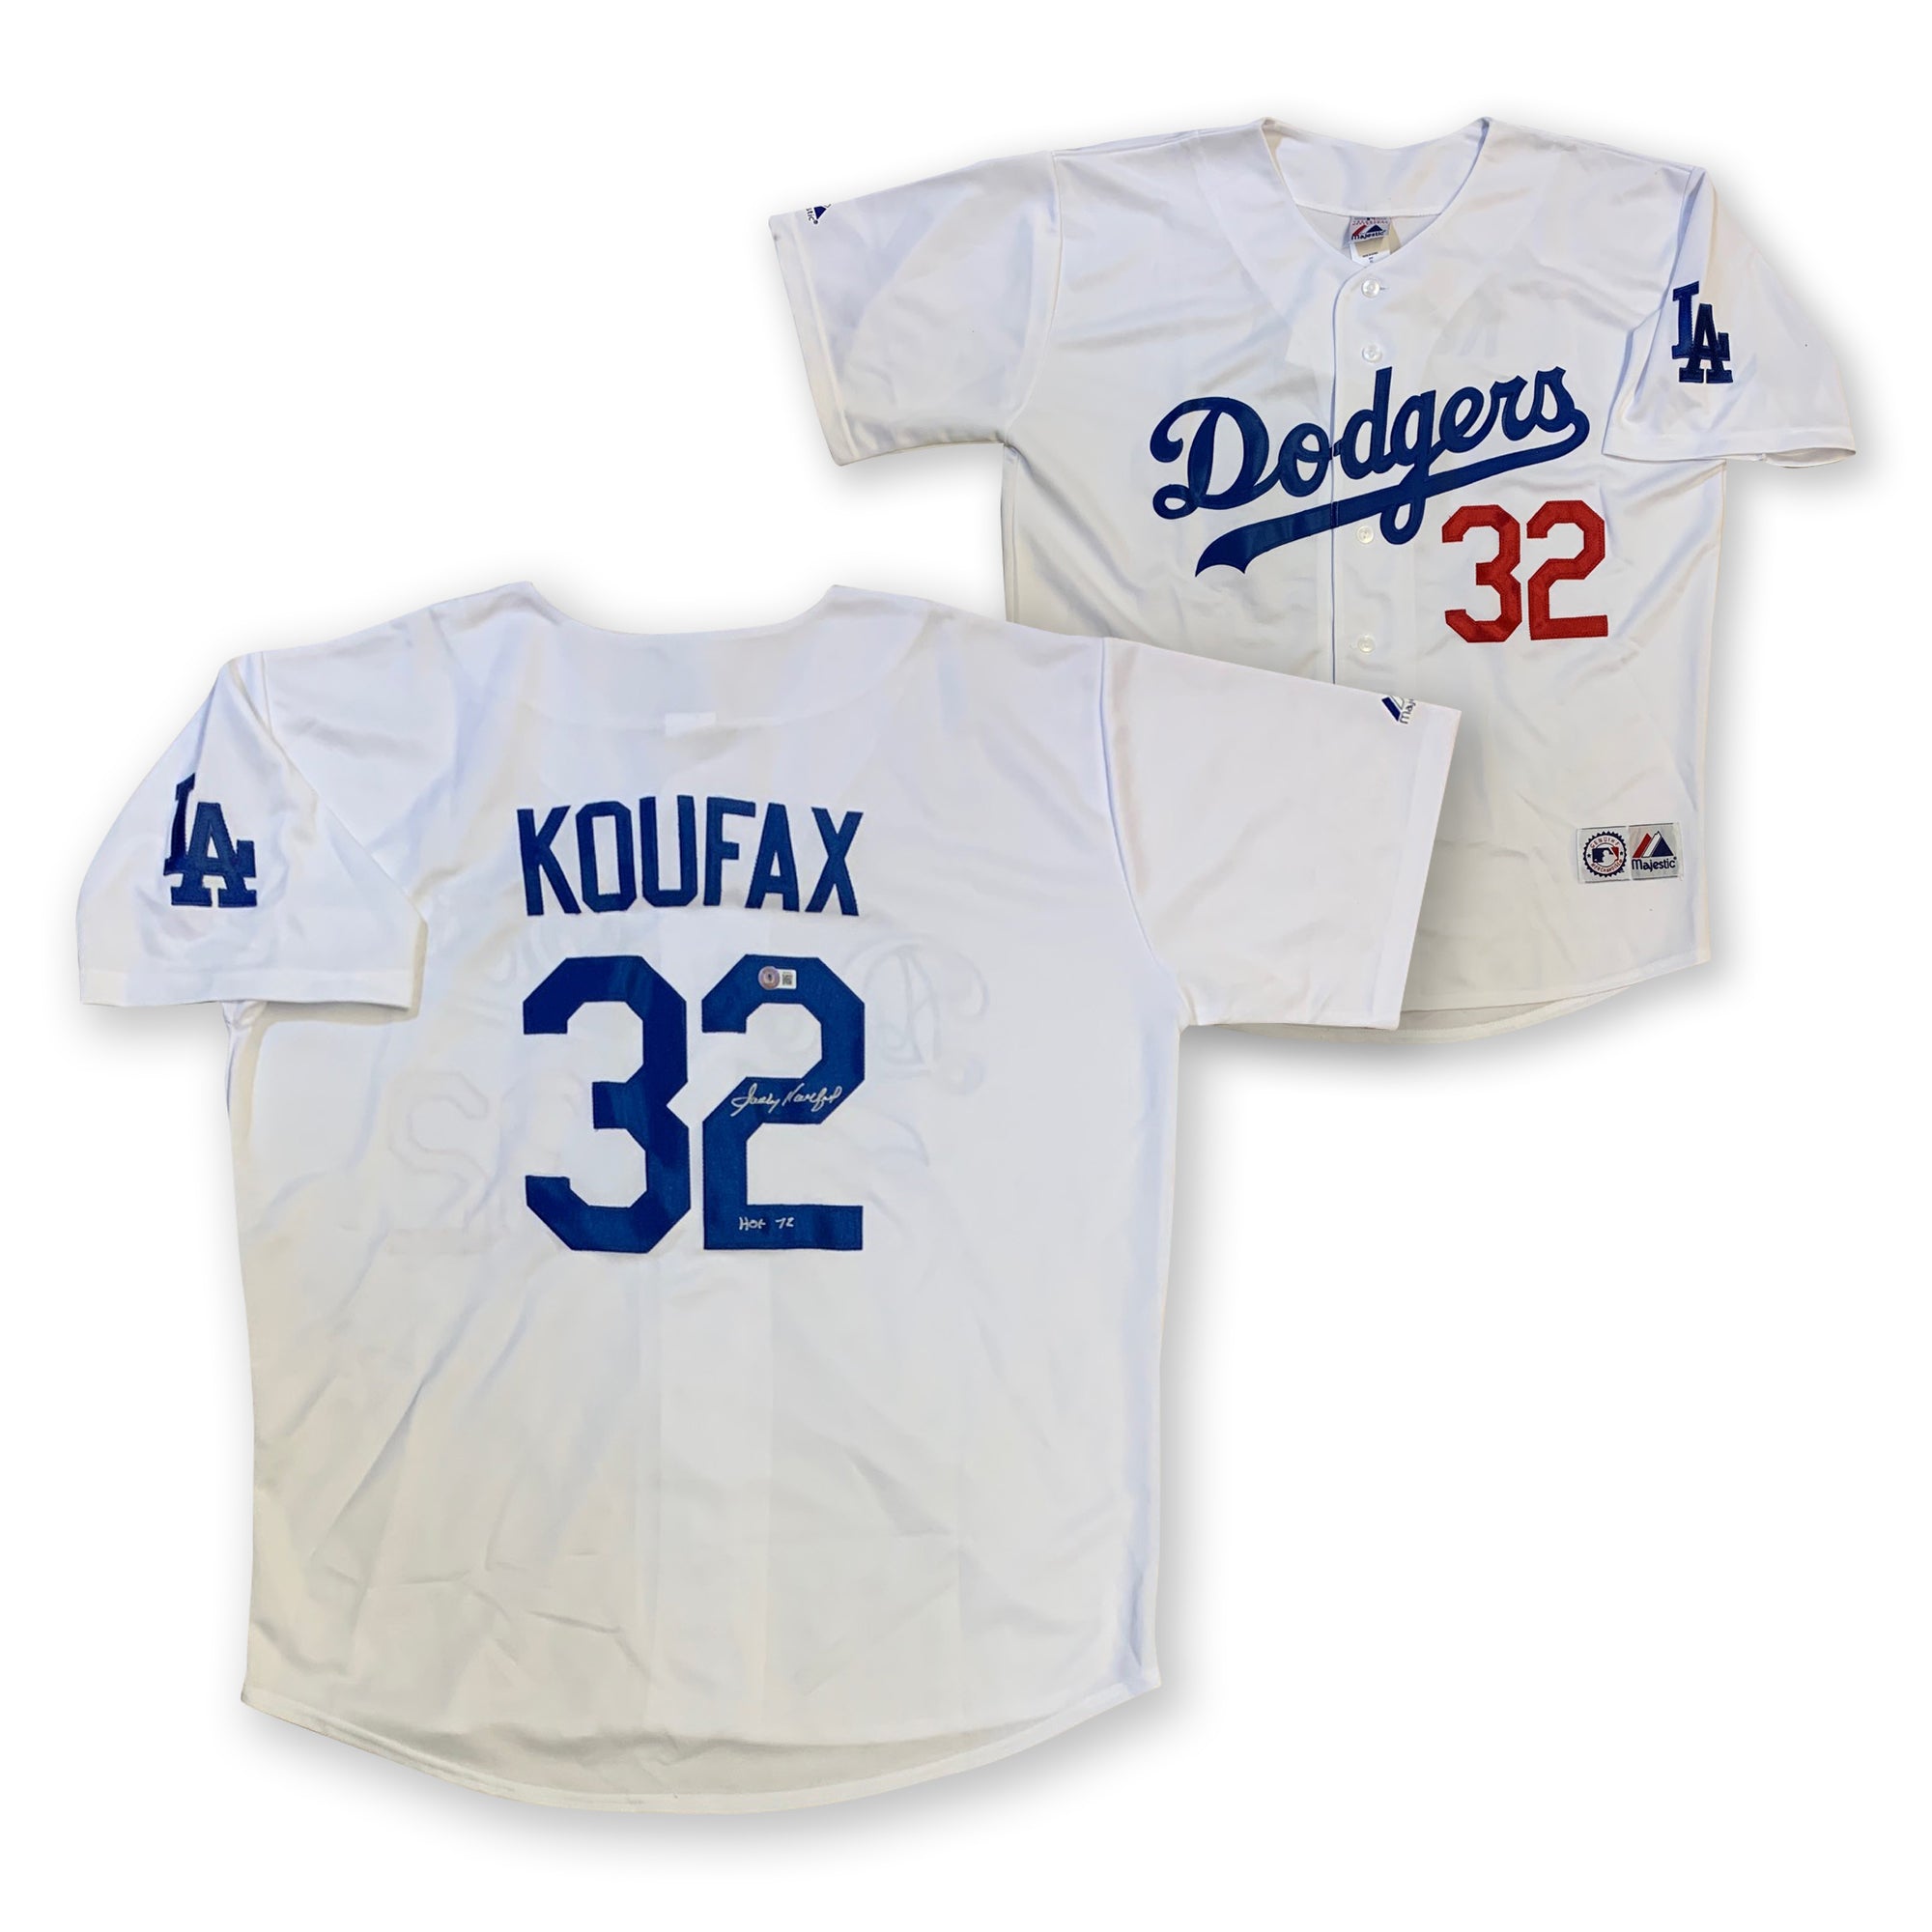 Mike Piazza Los Angeles Dodgers Autographed Mitchell and Ness